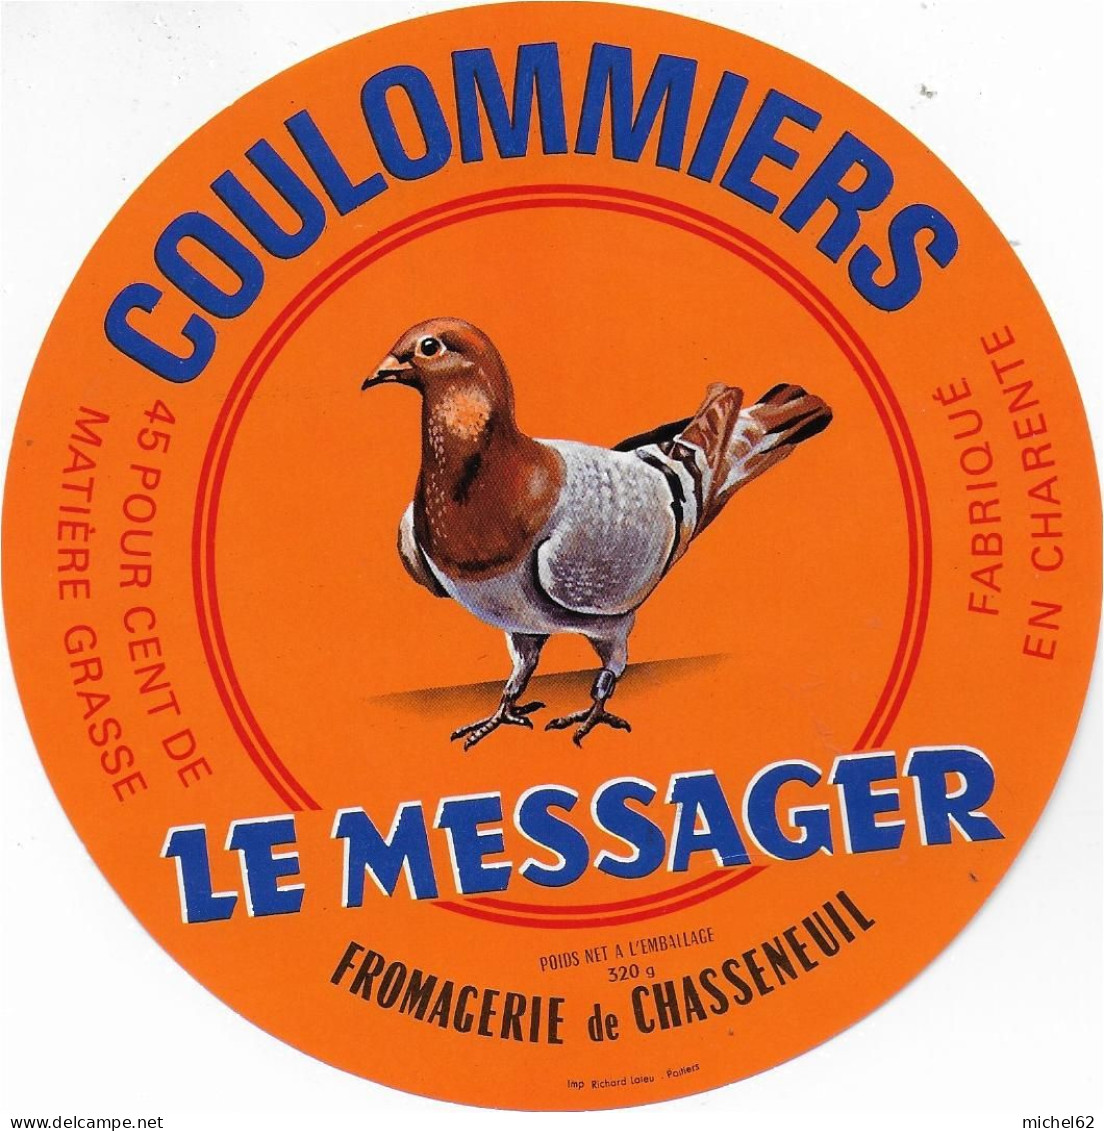 ETIQUETTE  DE  FROMAGE NEUVE   COULOMMIERS LE MESSAGER PIGEON CHARENTE  CHASSENEUIL VARIANTE - Cheese